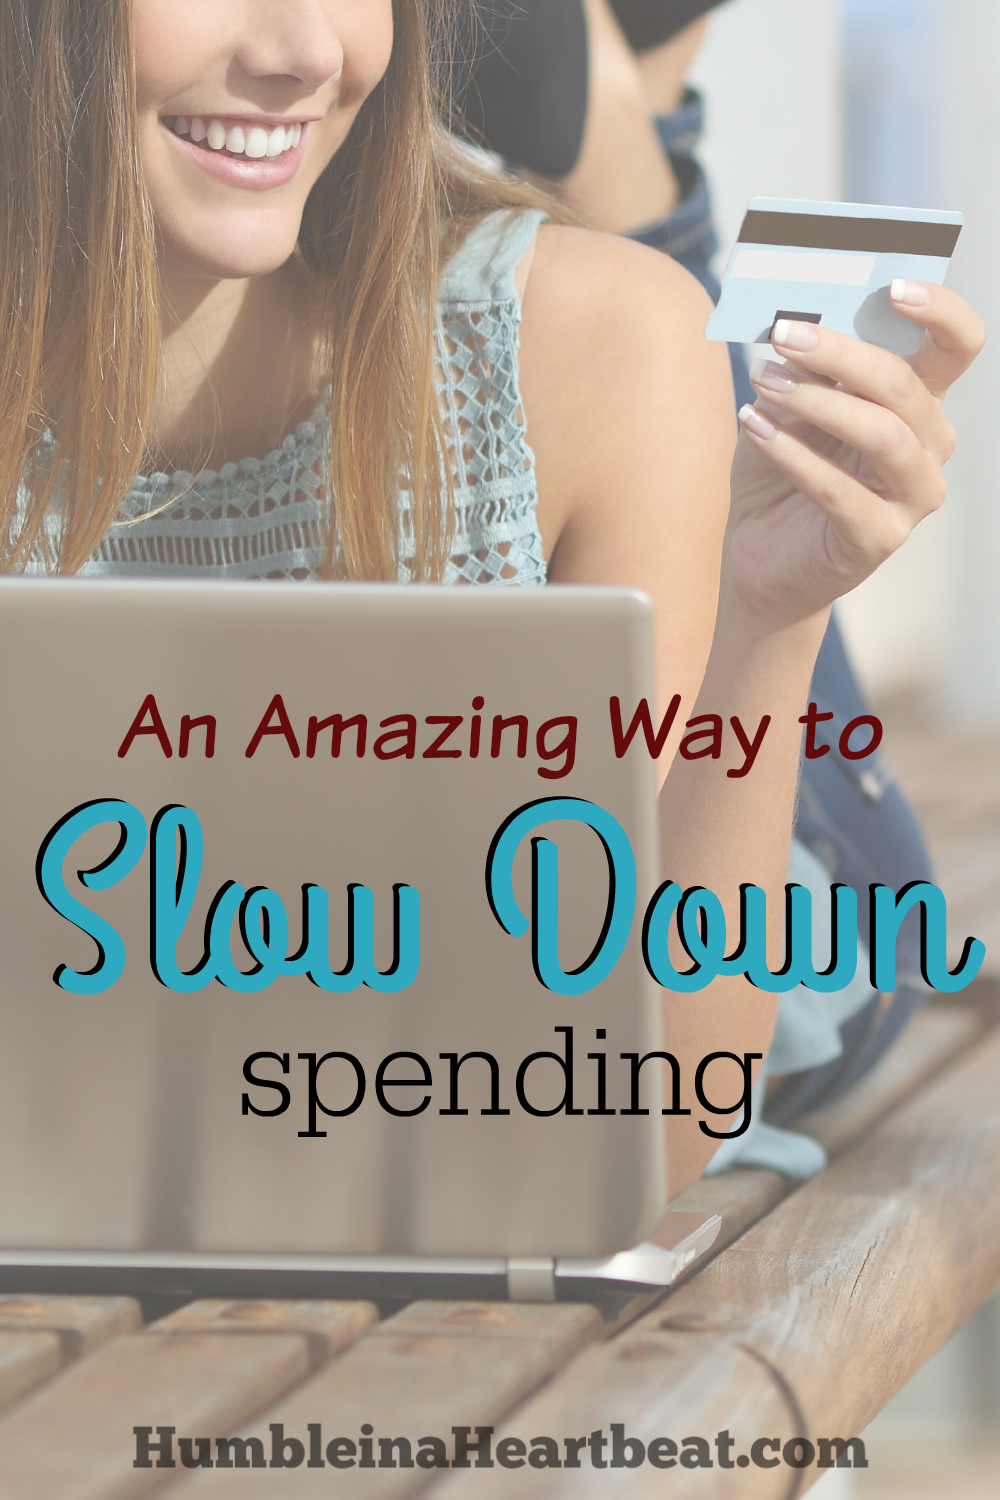 It's too easy to get into a mindset to spend, spend, spend, without even thinking twice. But if you're a little tired of all the stuff you have, and you want to scale back on your spending, maybe this little trick will work for you...